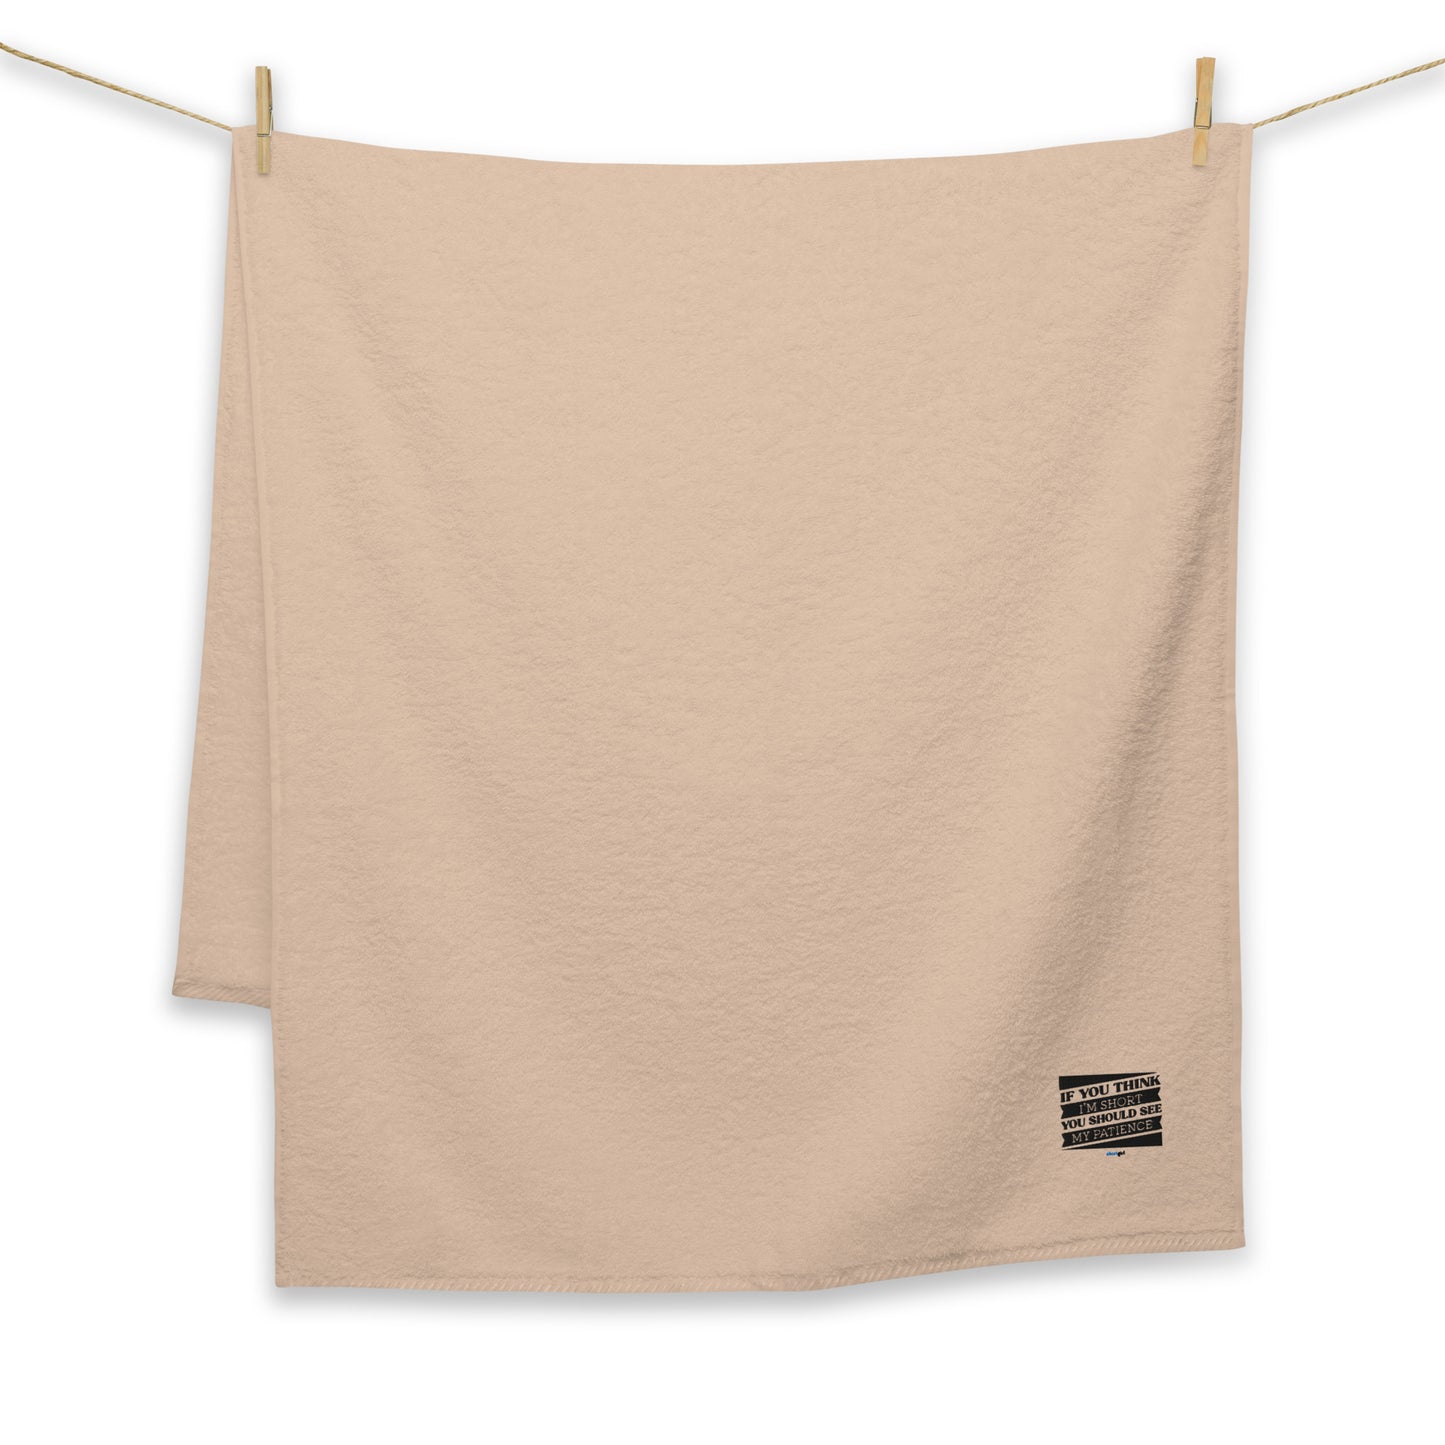 Turkish cotton towel - If you think I'm short, you should see my patience